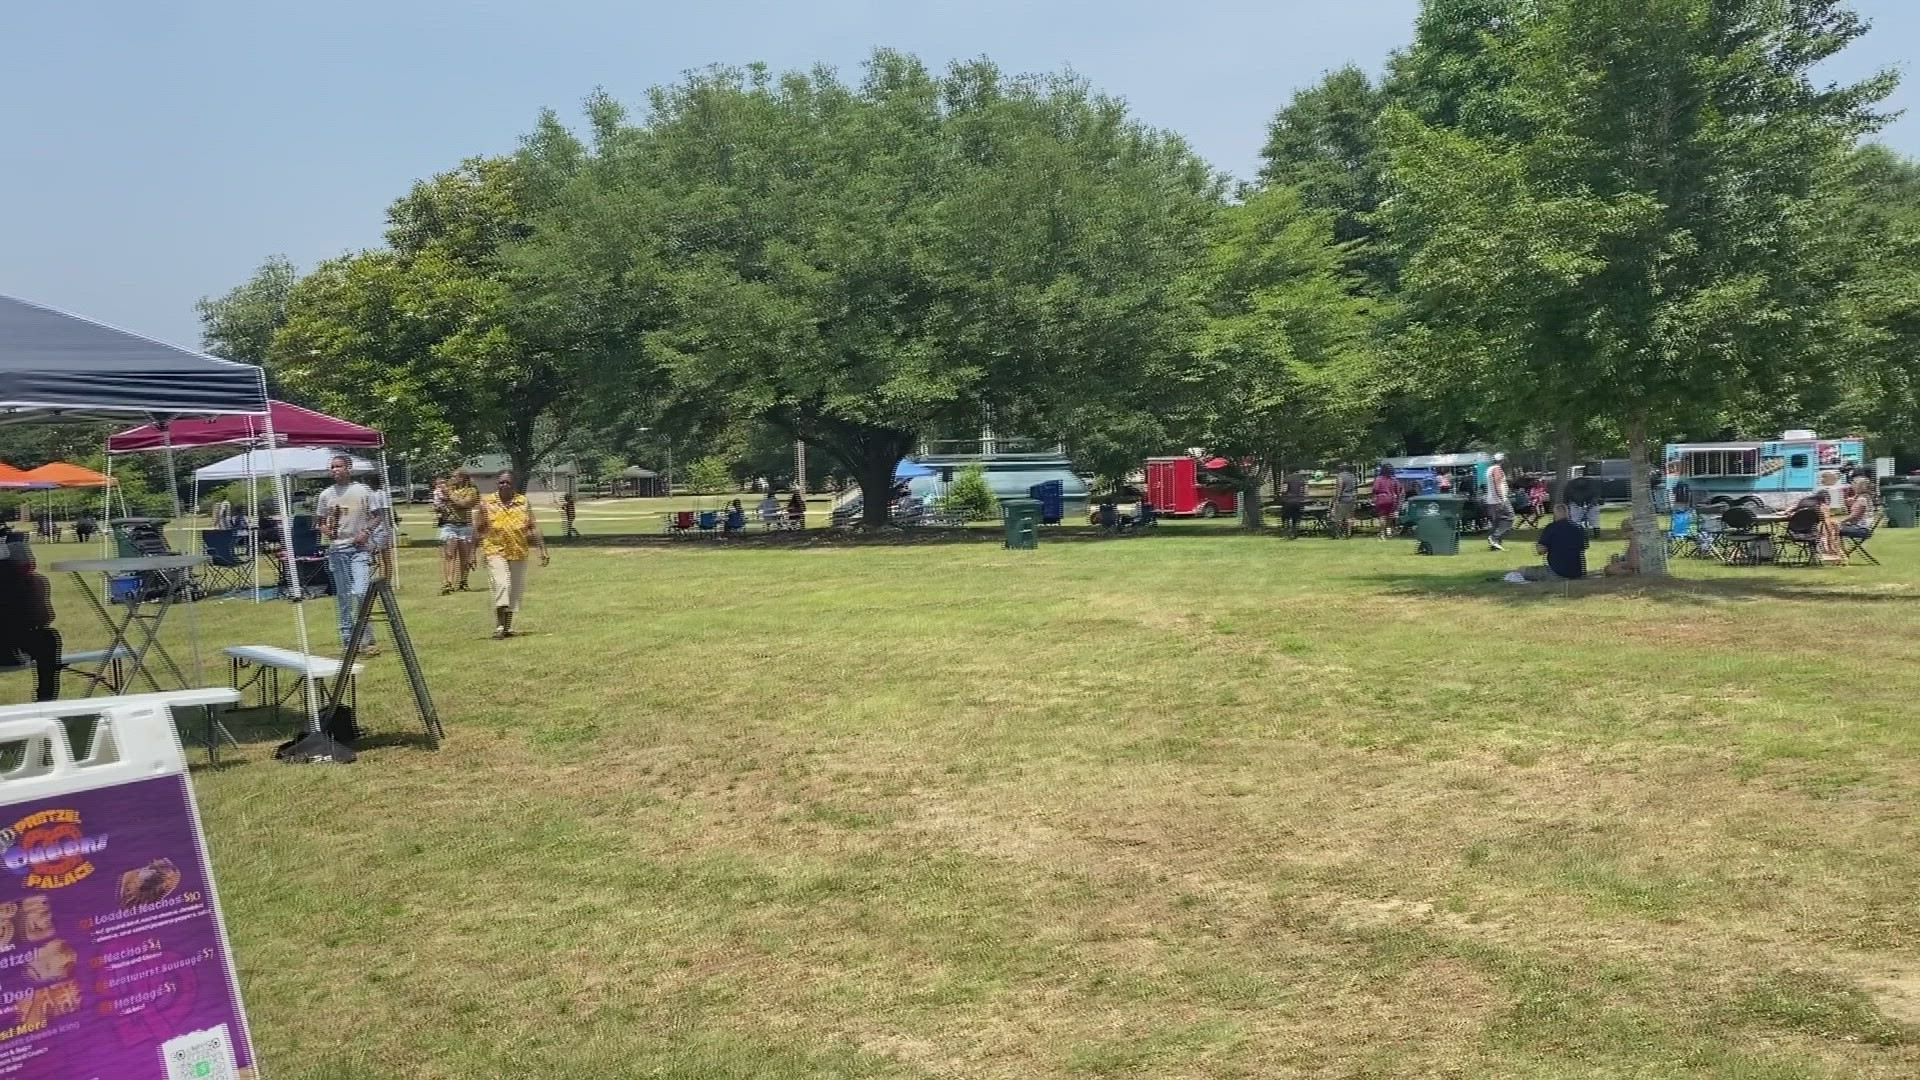 People walked around the park and visited various food trucks, drink stands, and vendors.